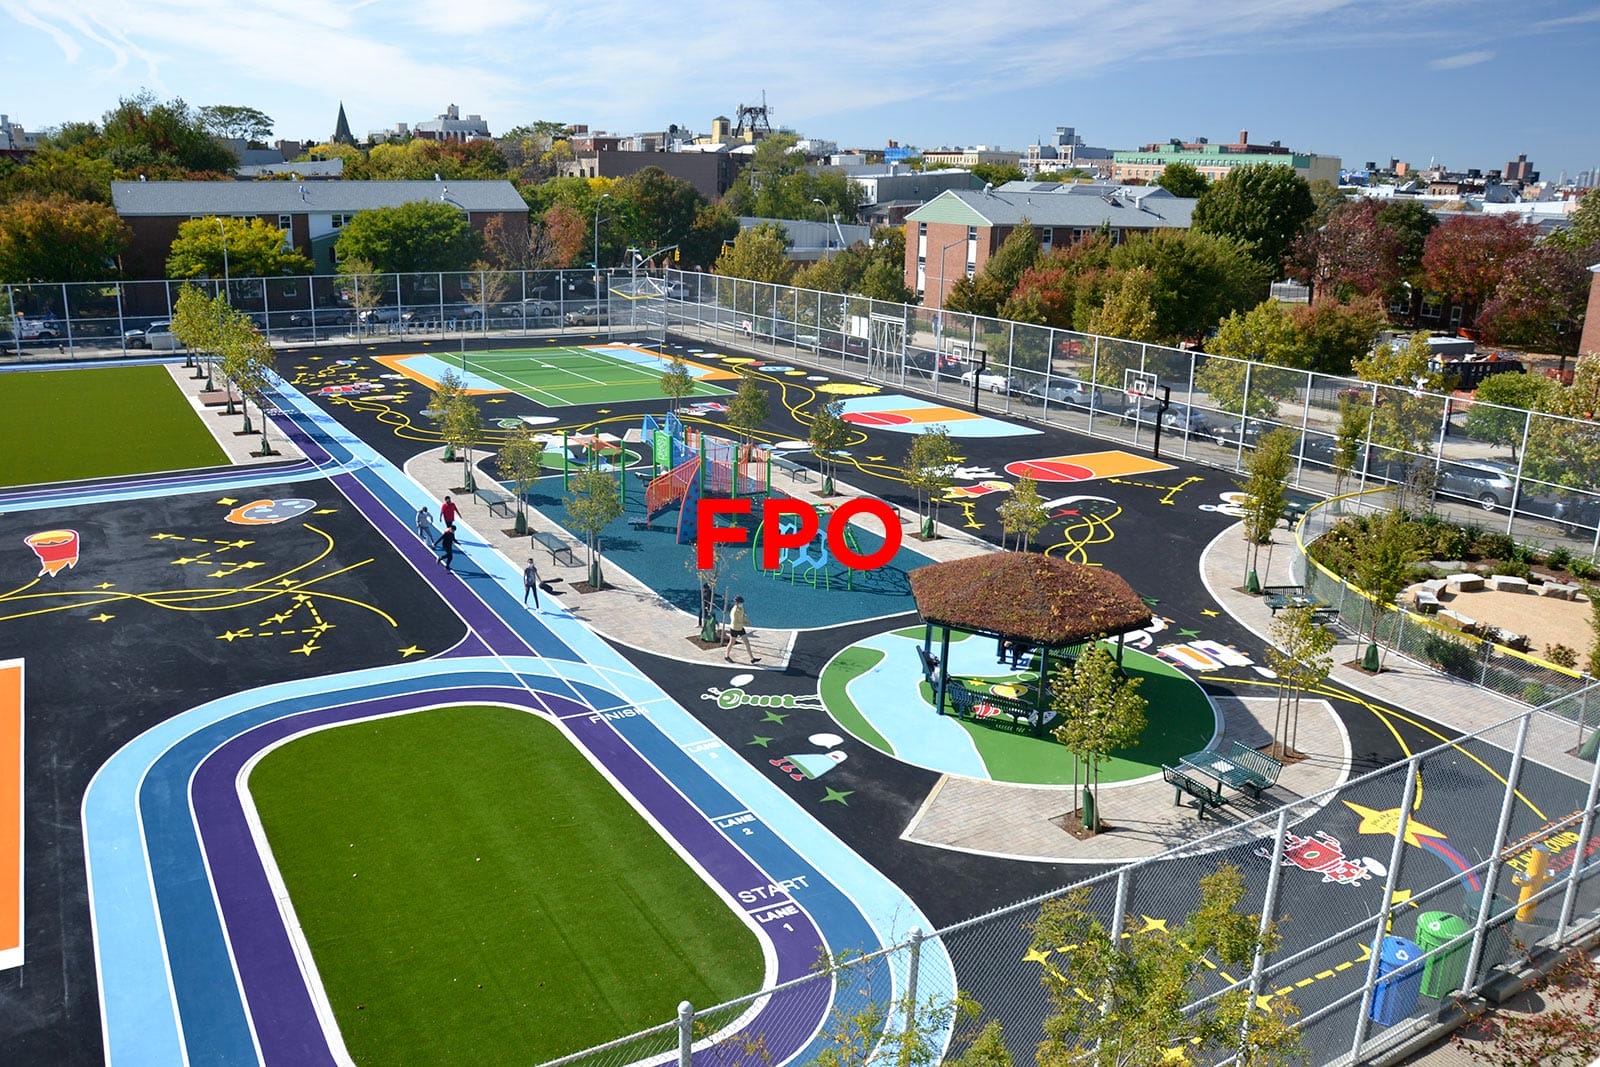 An aerial view of a playground with a basketball court.